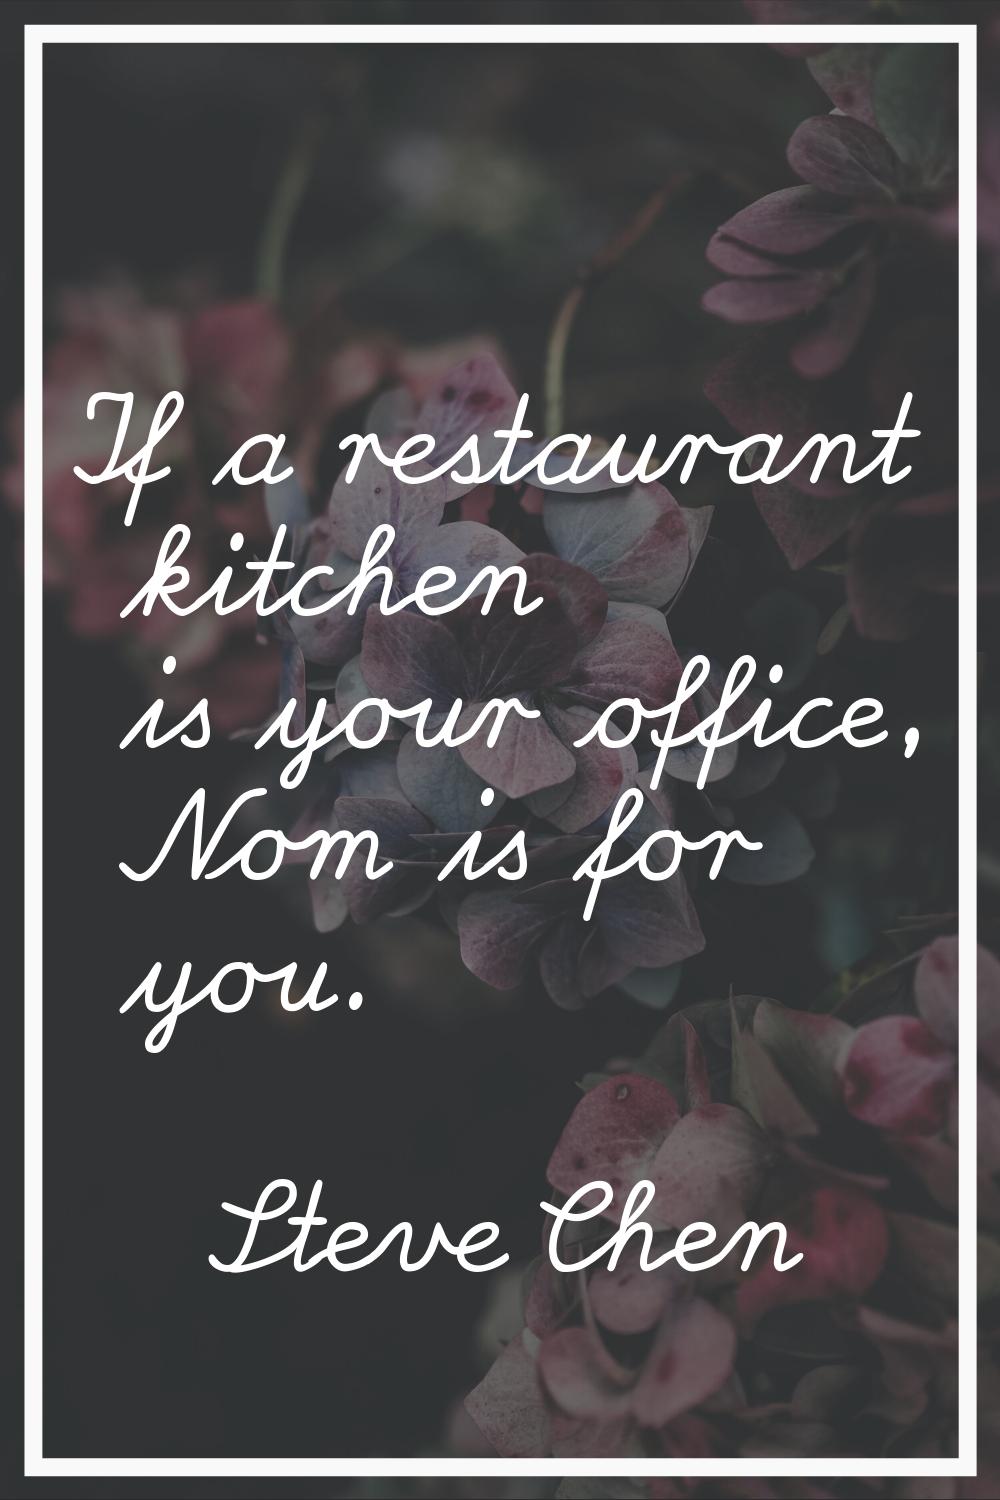 If a restaurant kitchen is your office, Nom is for you.